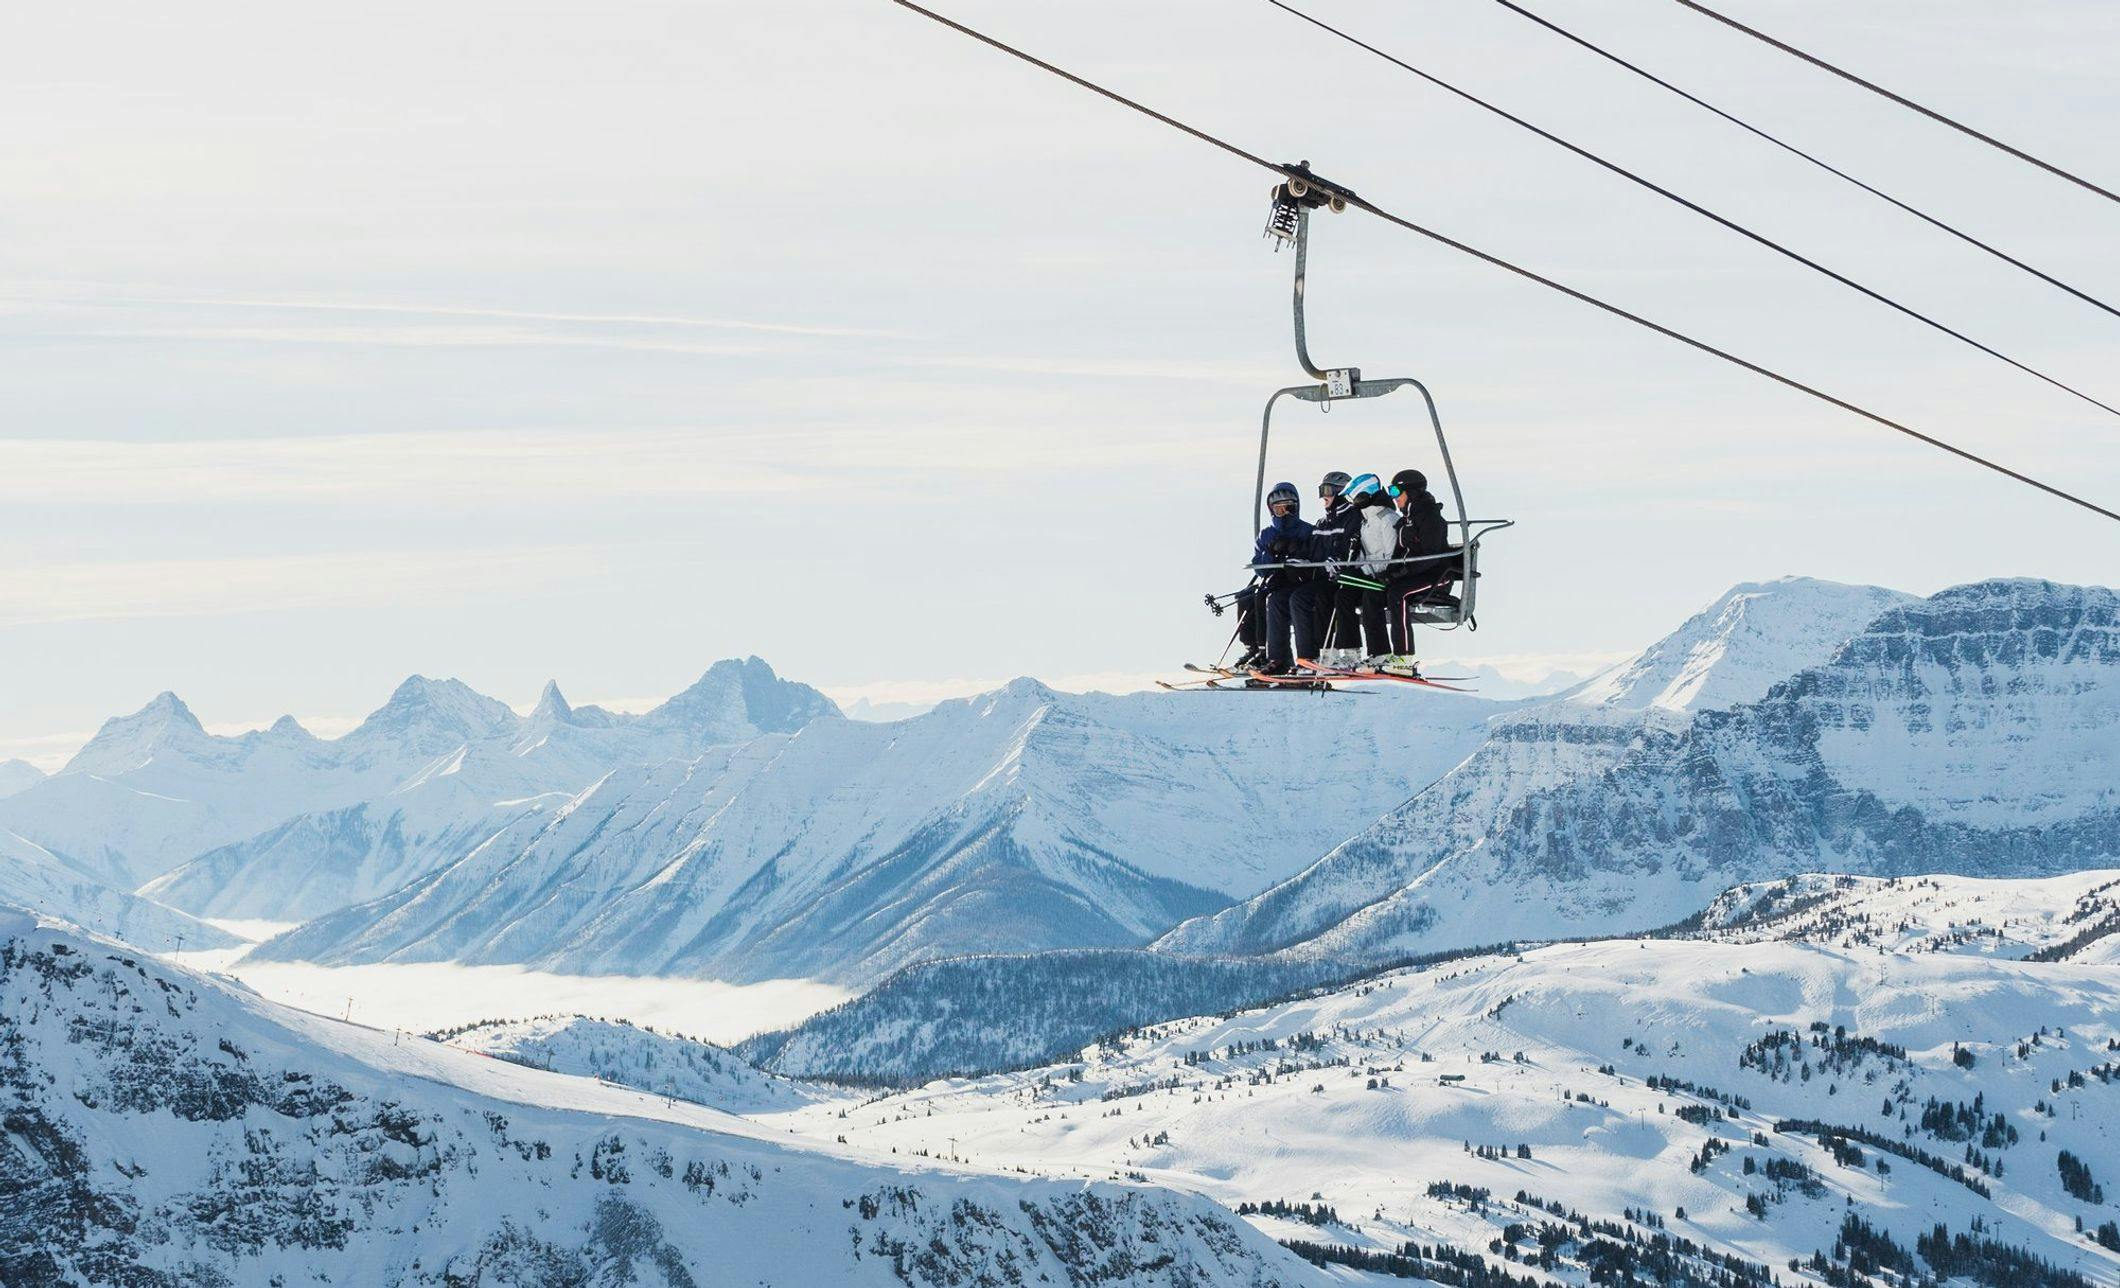 4 friends ride an open chairlift over a snowy ski hill with mountains in the background